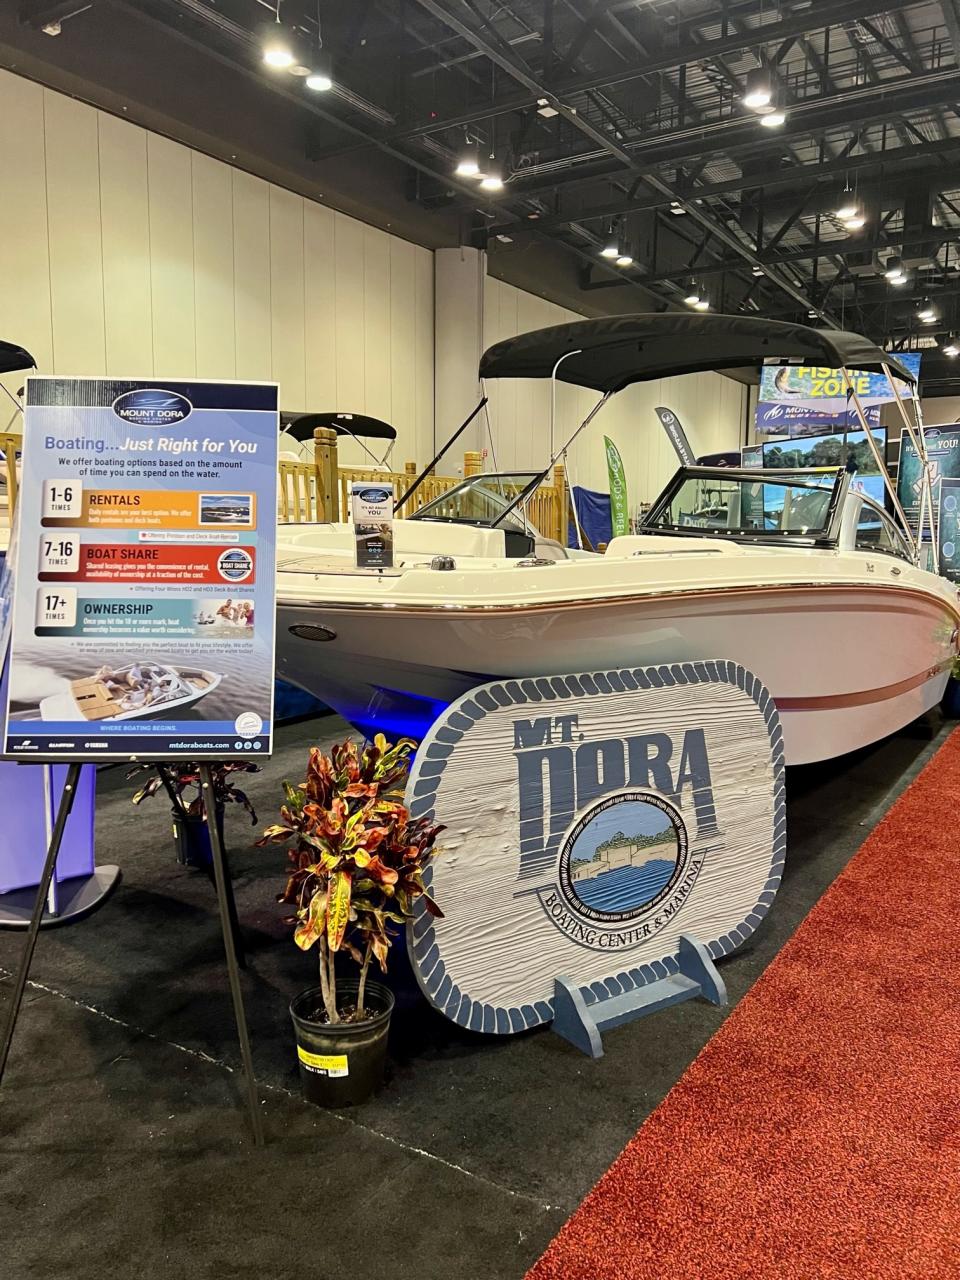 The boat show will be at the Orange County Convention Center.